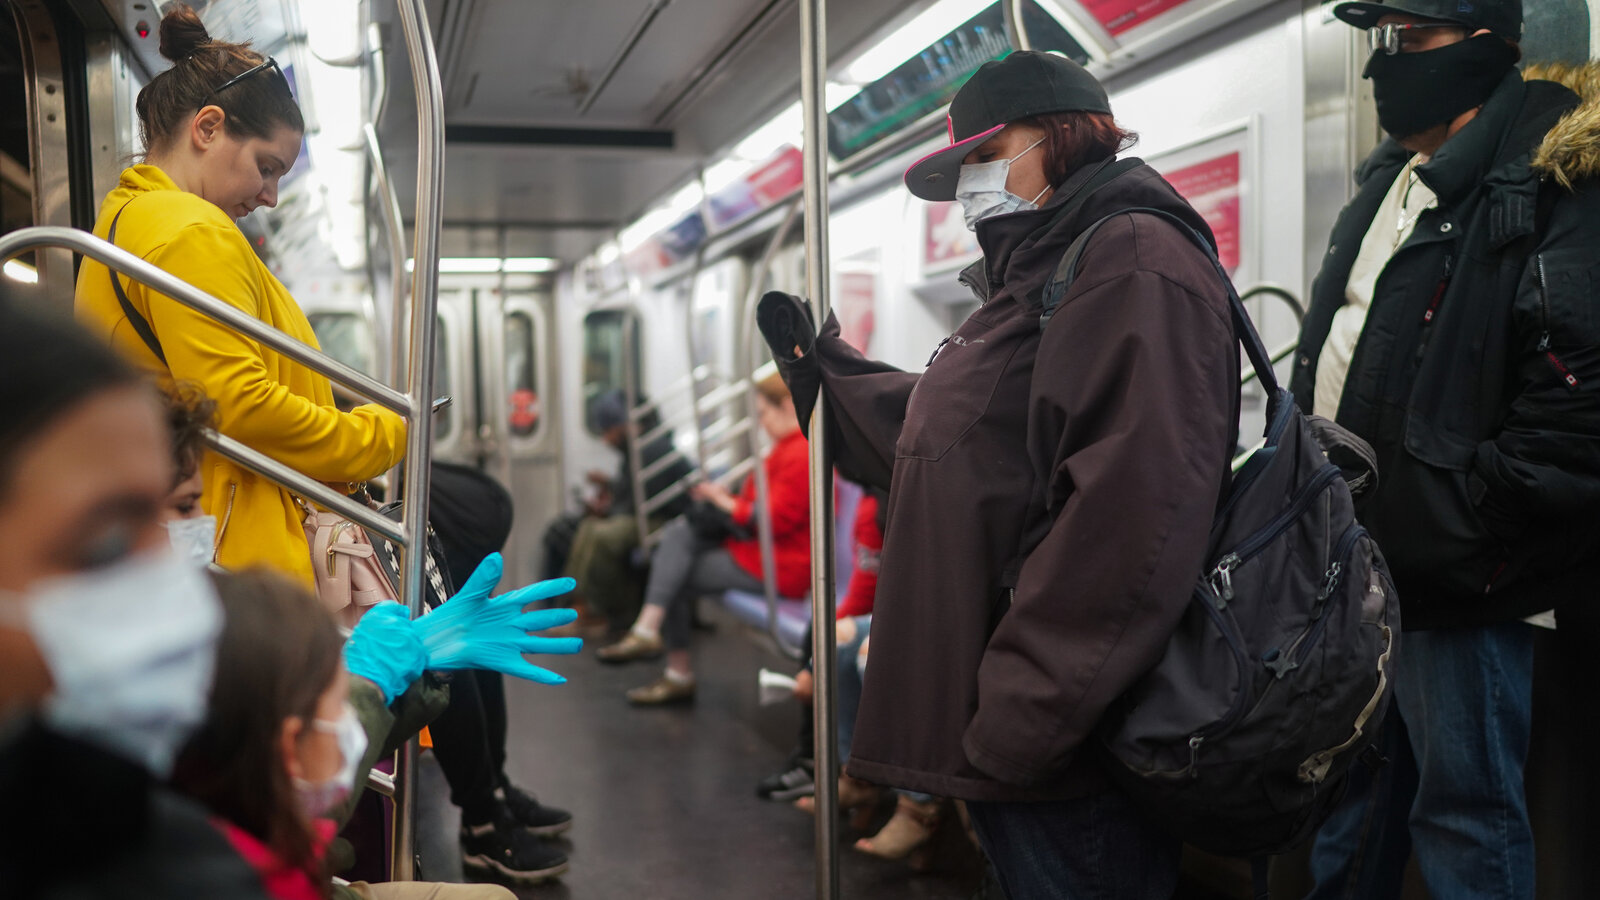 CDC extends mask wearing for public transportation in the US